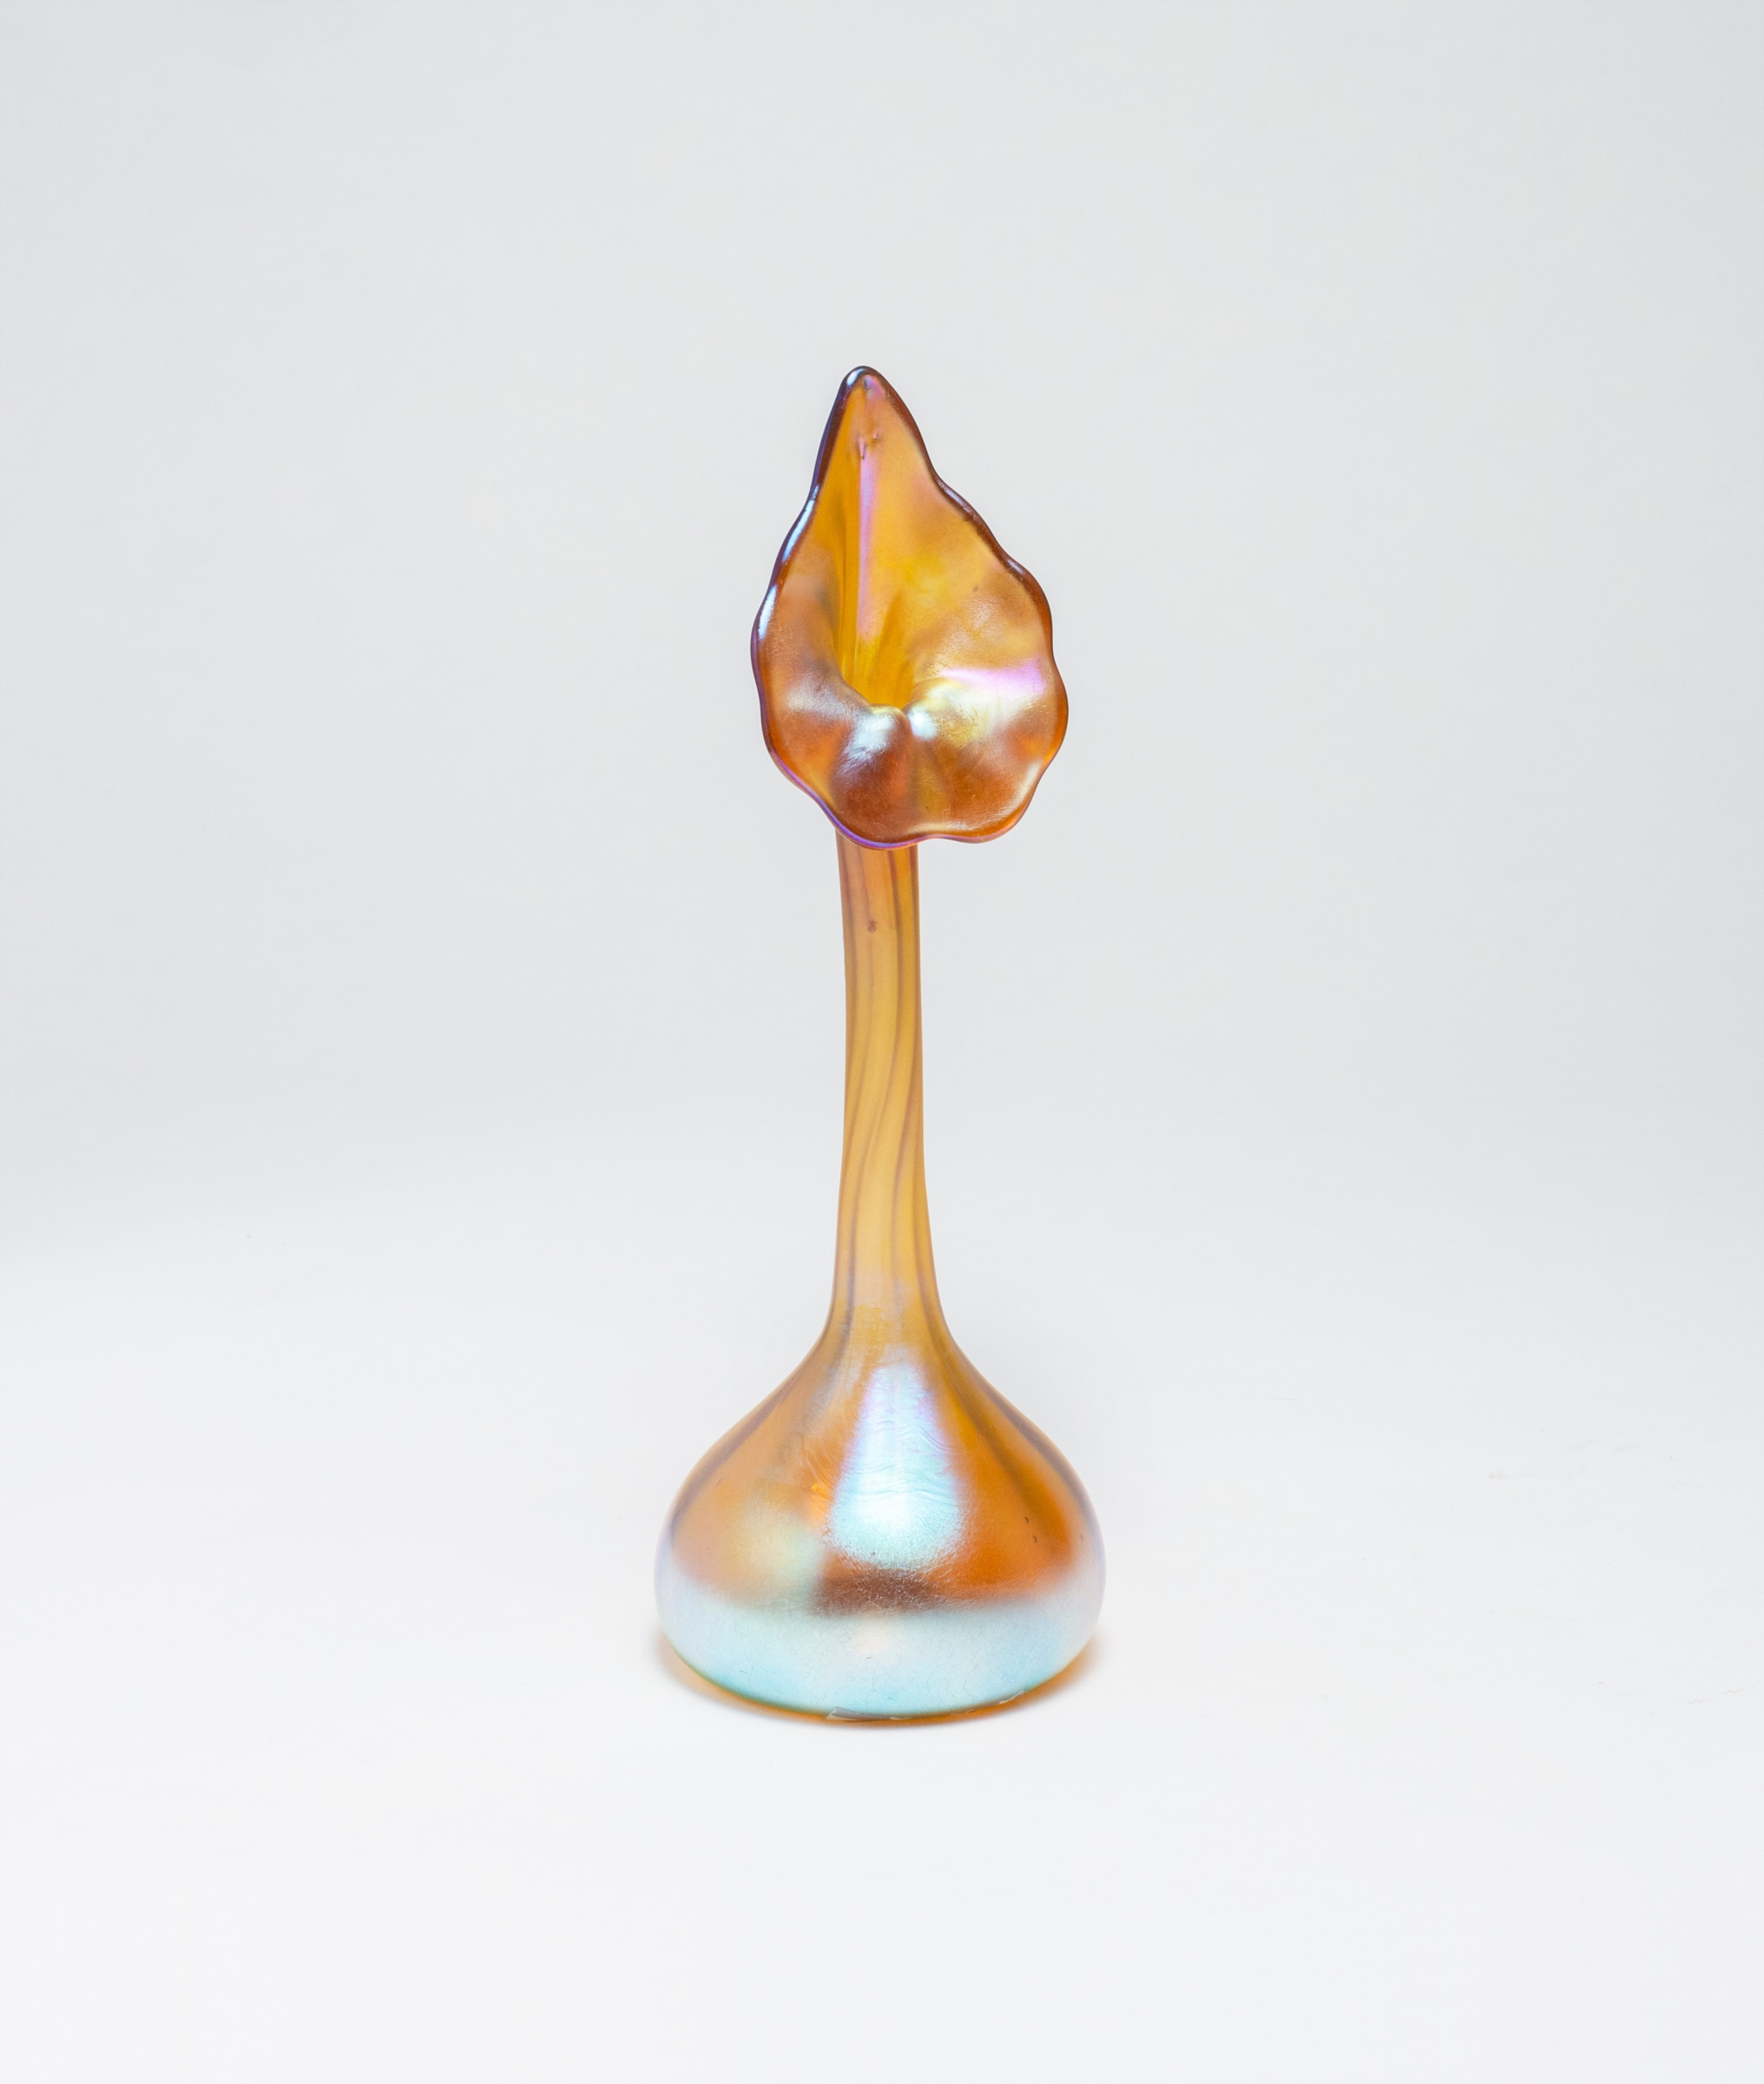 a tiffany favrile glass miniature flower form vase known as the jack in the pulpit, rounded pillow like base rising to a thin stem which terminates in an open flower-like face